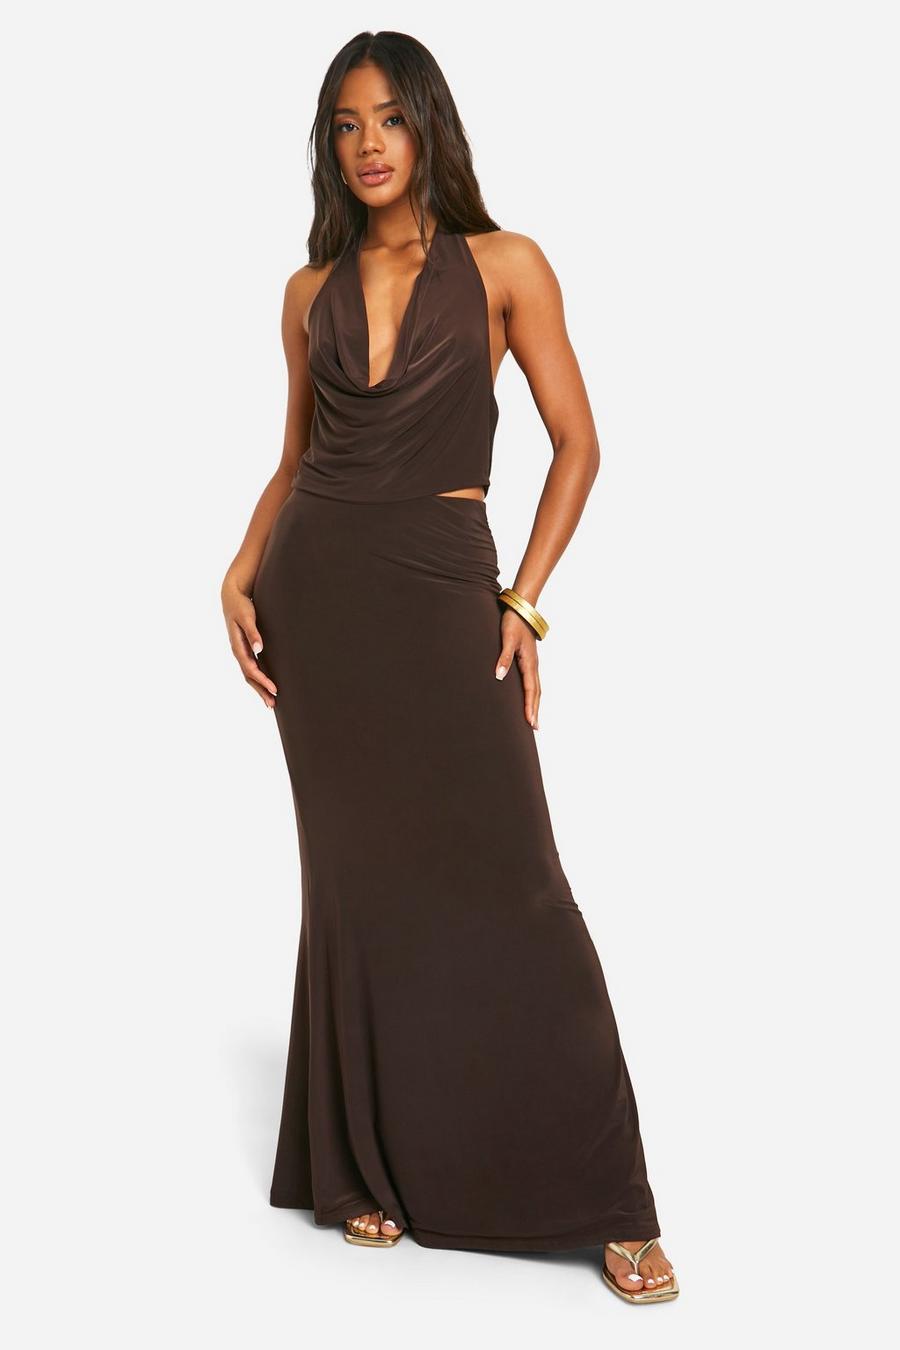 Chocolate Plunge Halter Cowl & Flared Maxi Skirt